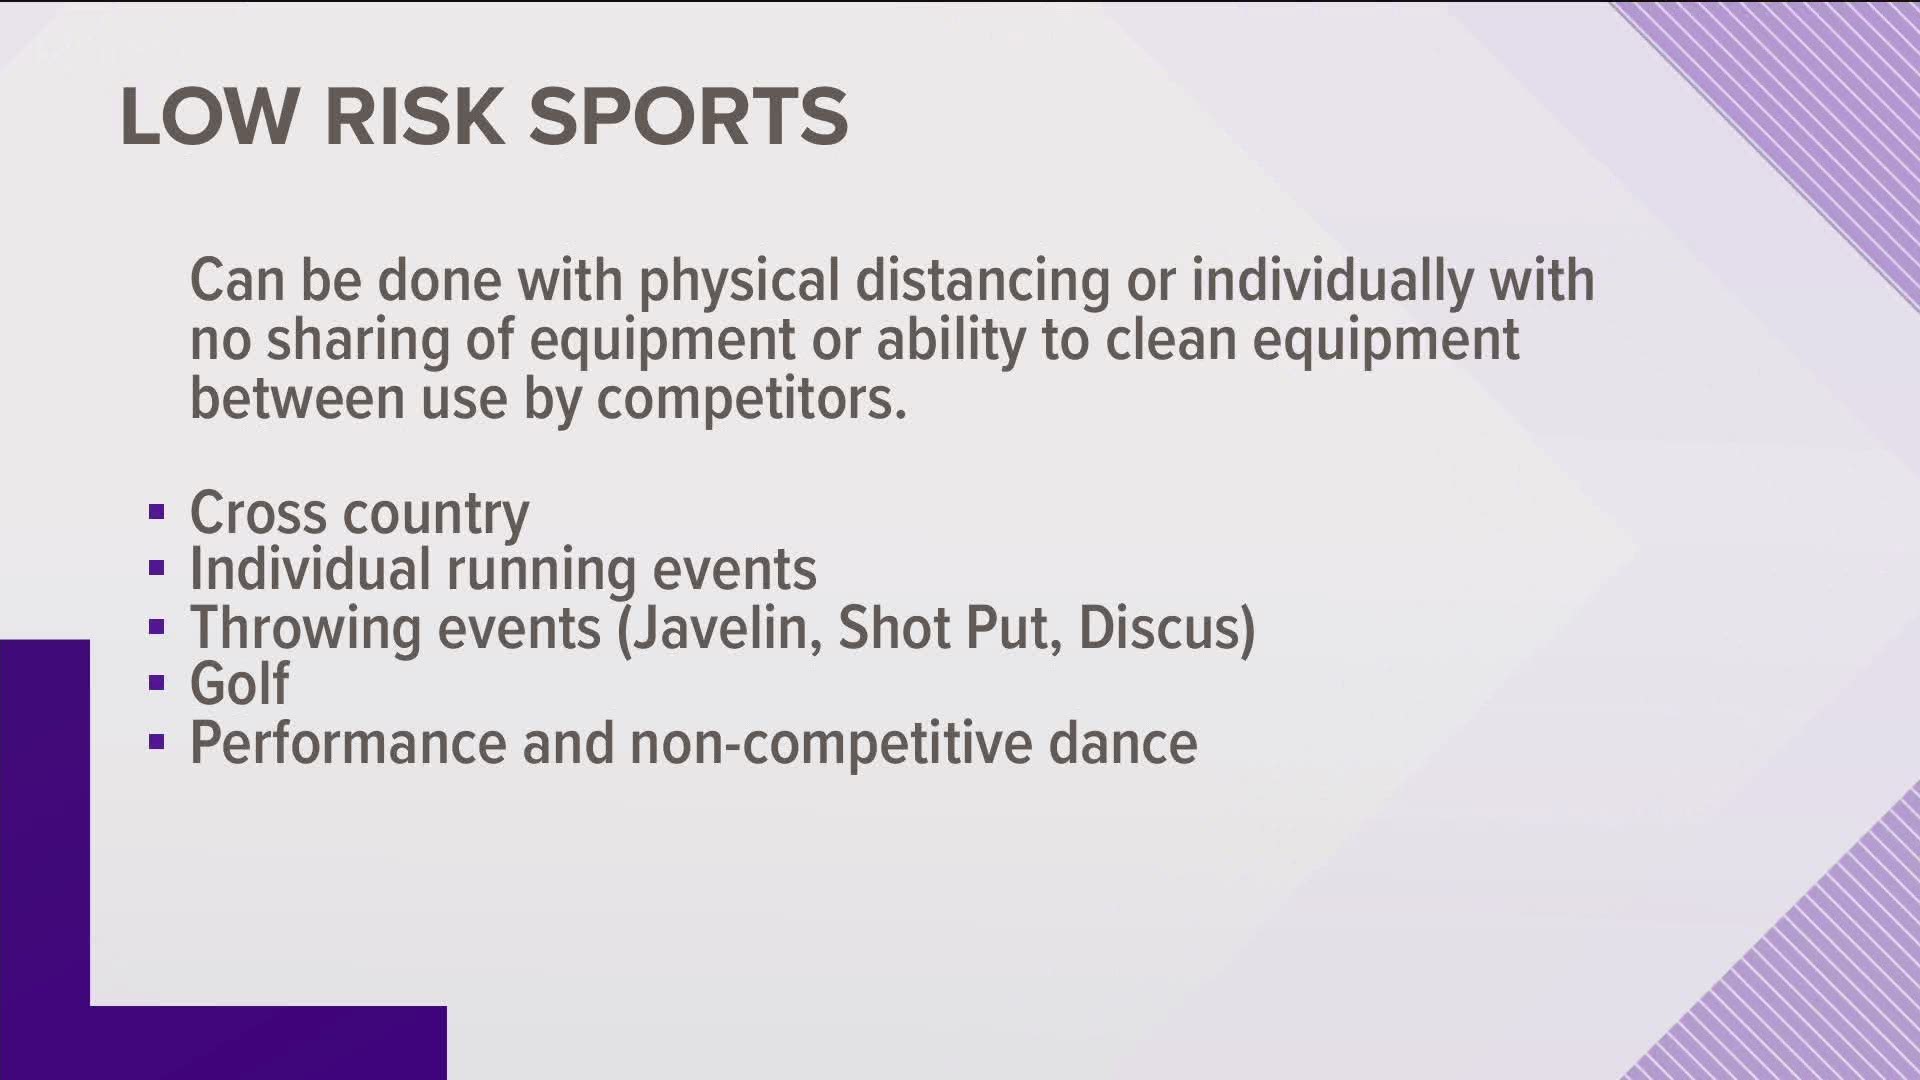 SPS’s Athletics and Activities Subcommittee broke down each sport into three groups based on risk: low, moderate and high.